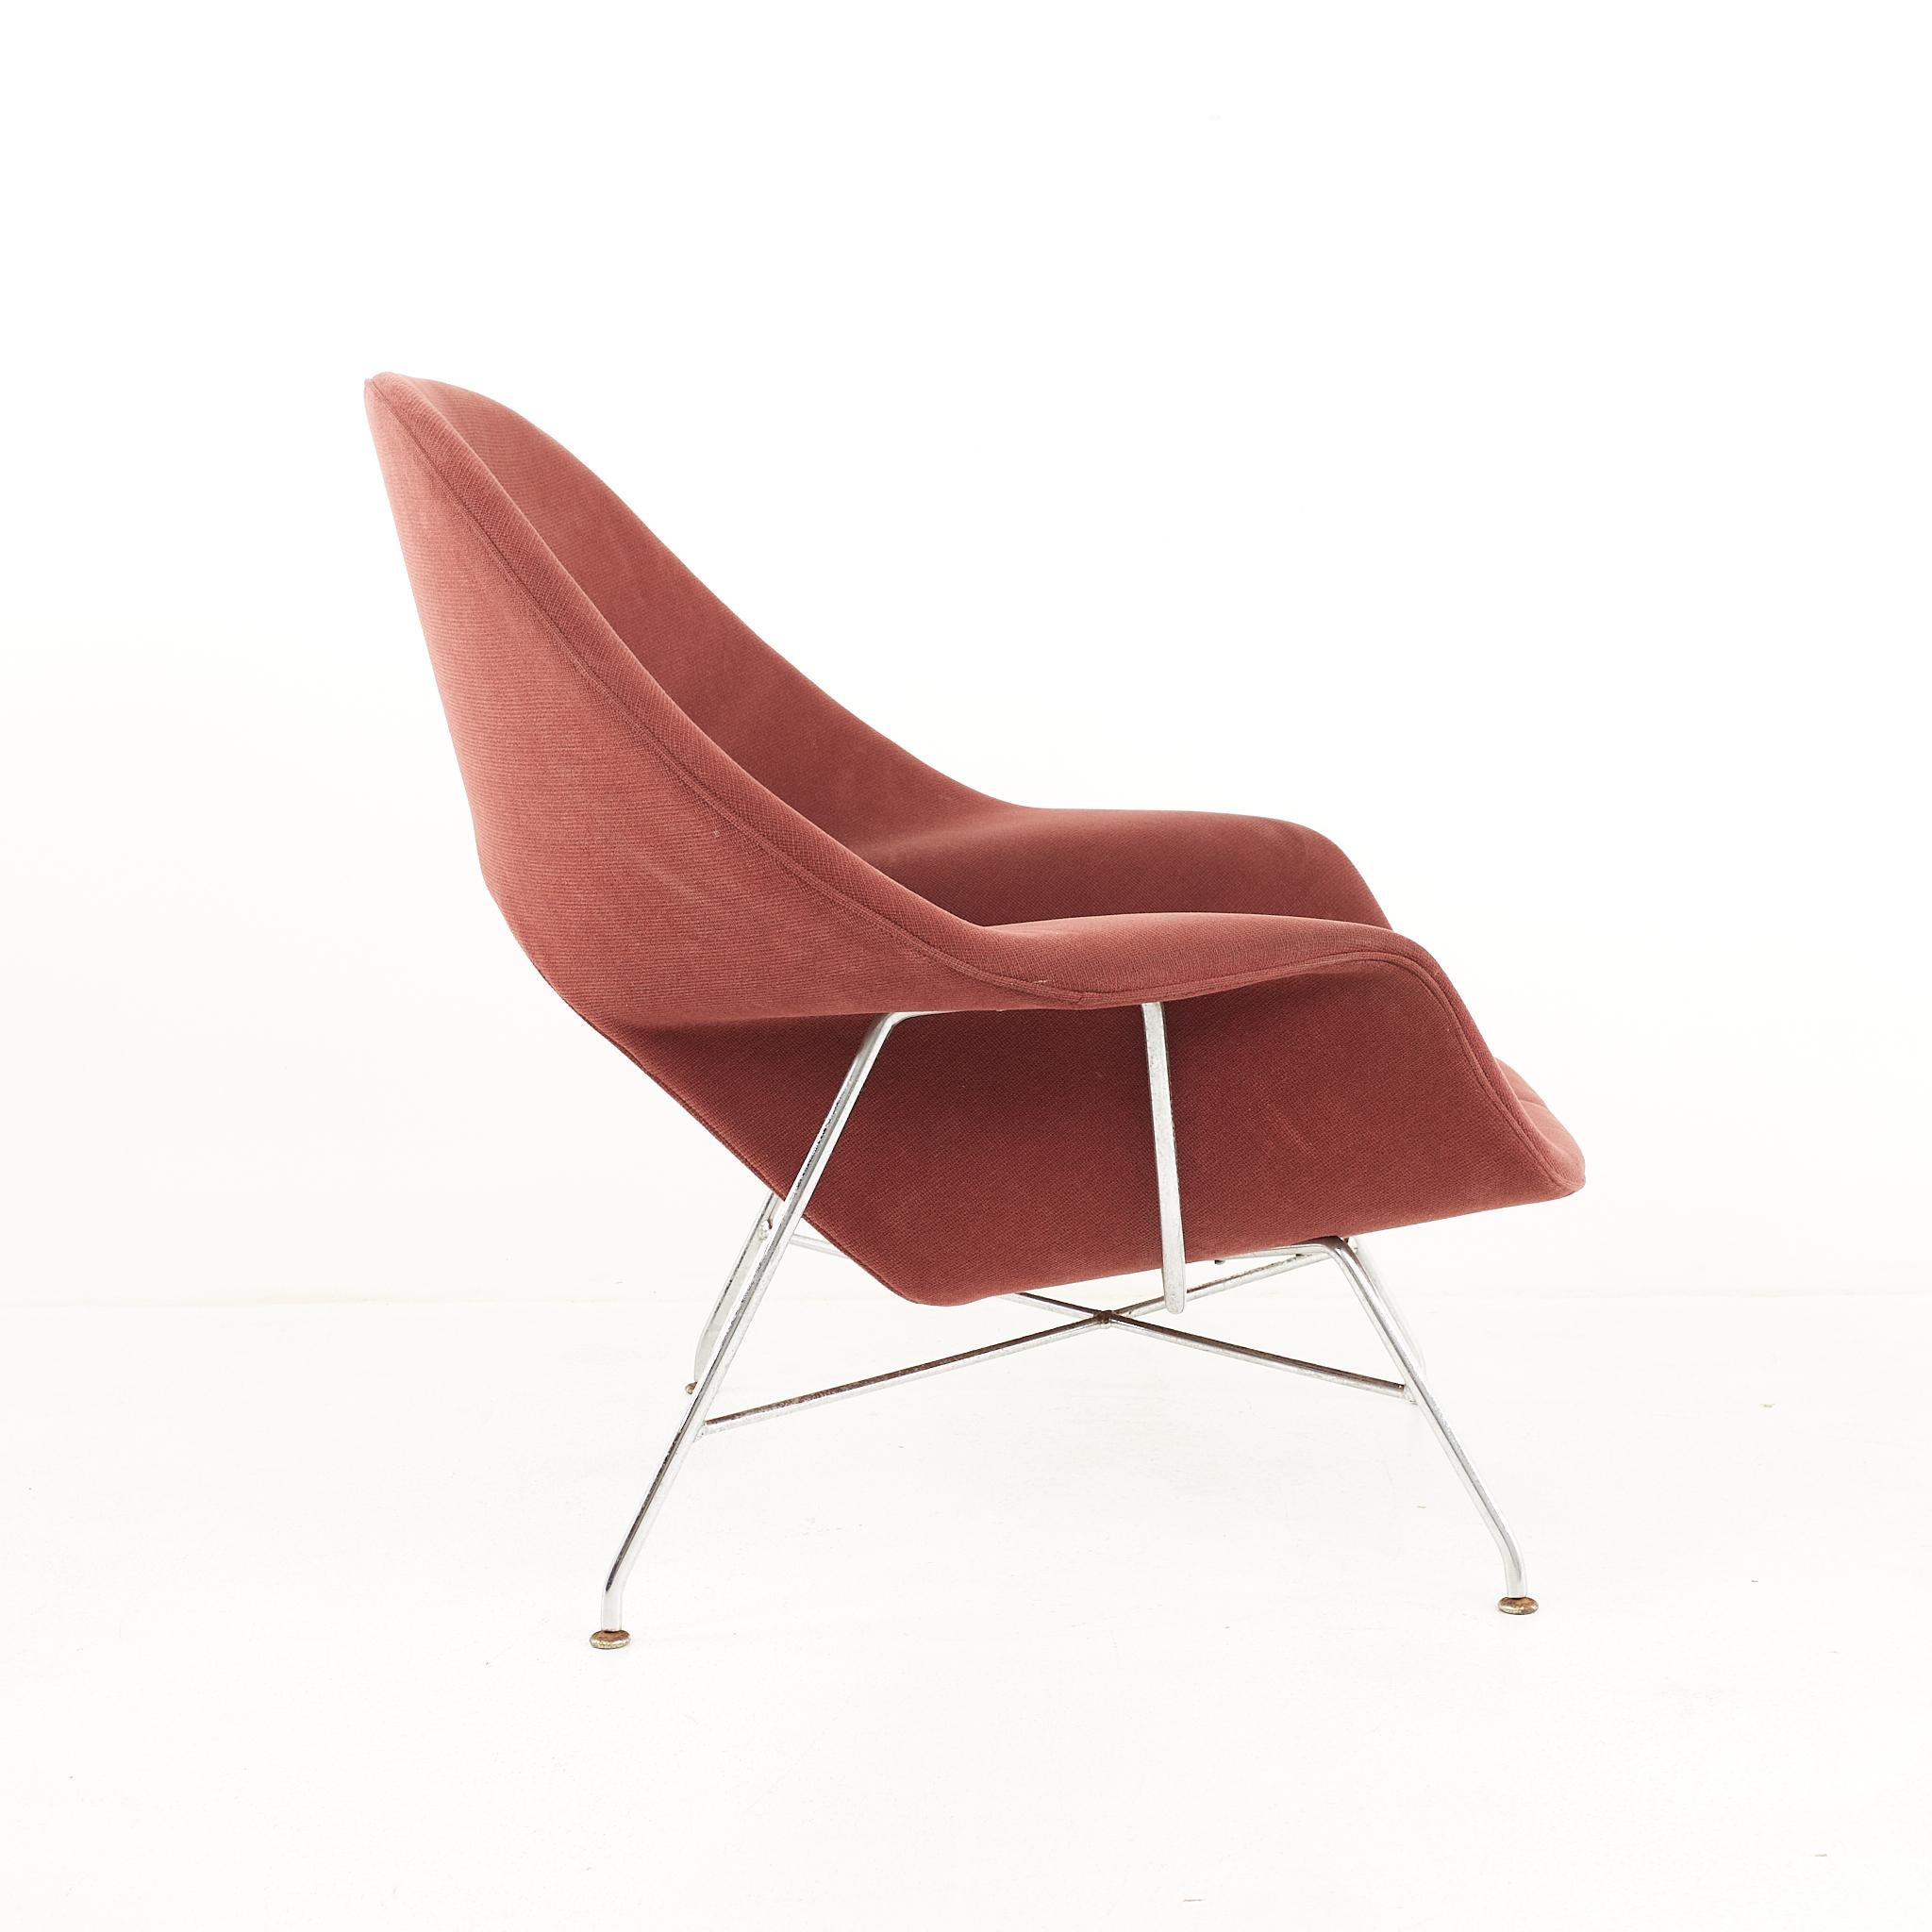 Upholstery Eero Saarinen for Knoll Mid Century Womb Chair with Chrome Frame, Set of 2 For Sale